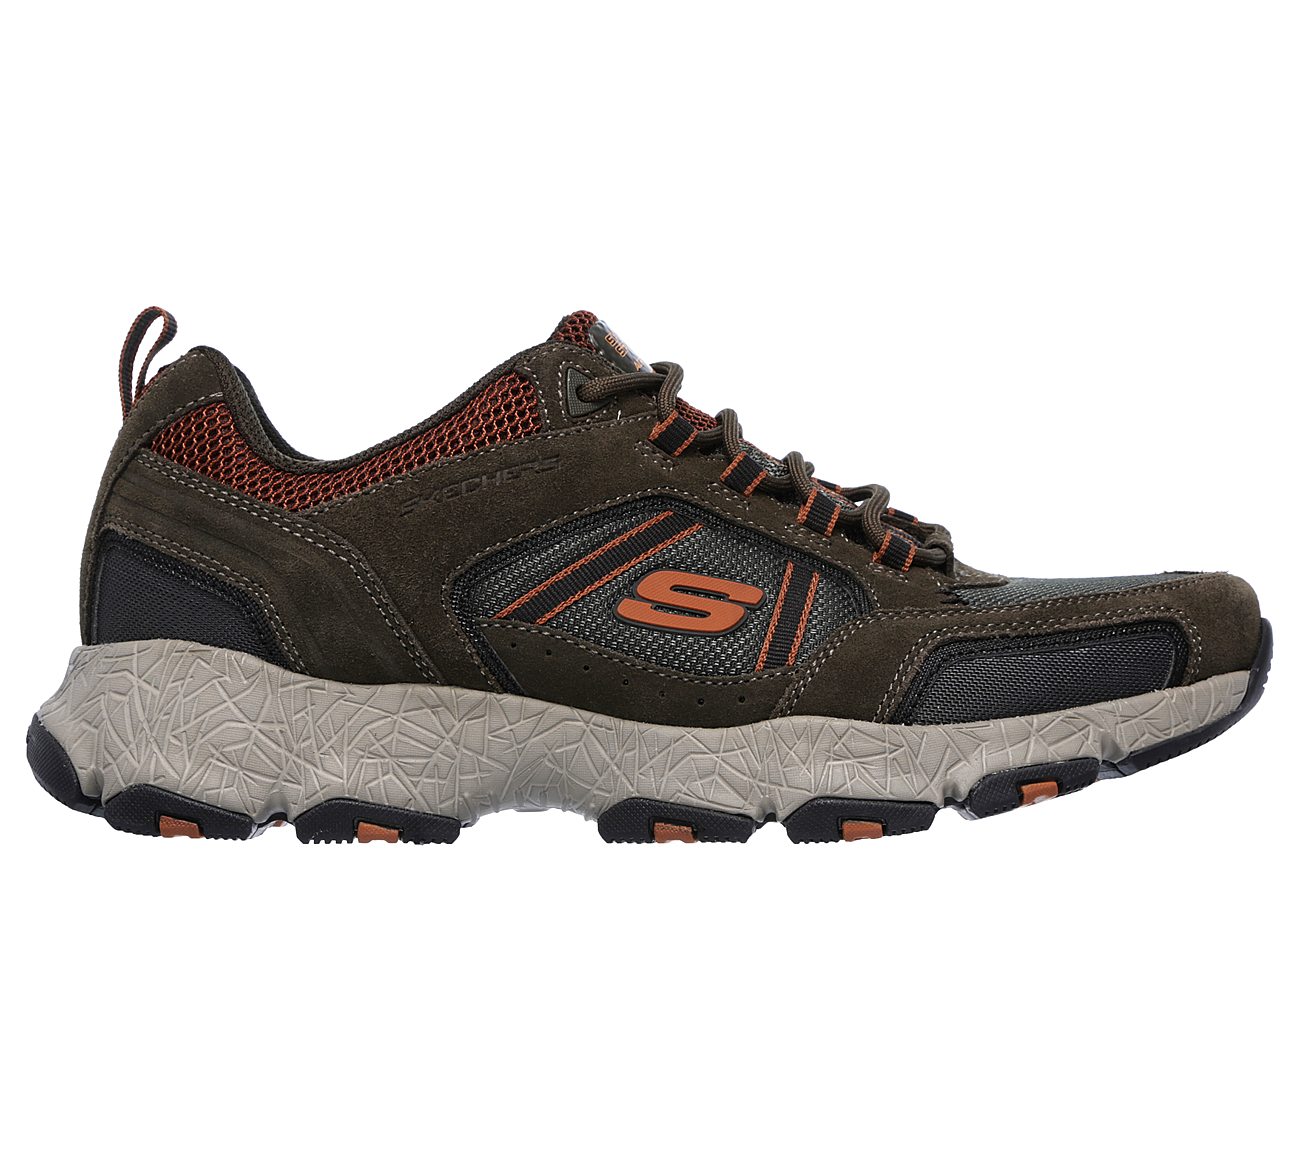 skechers shoes perth